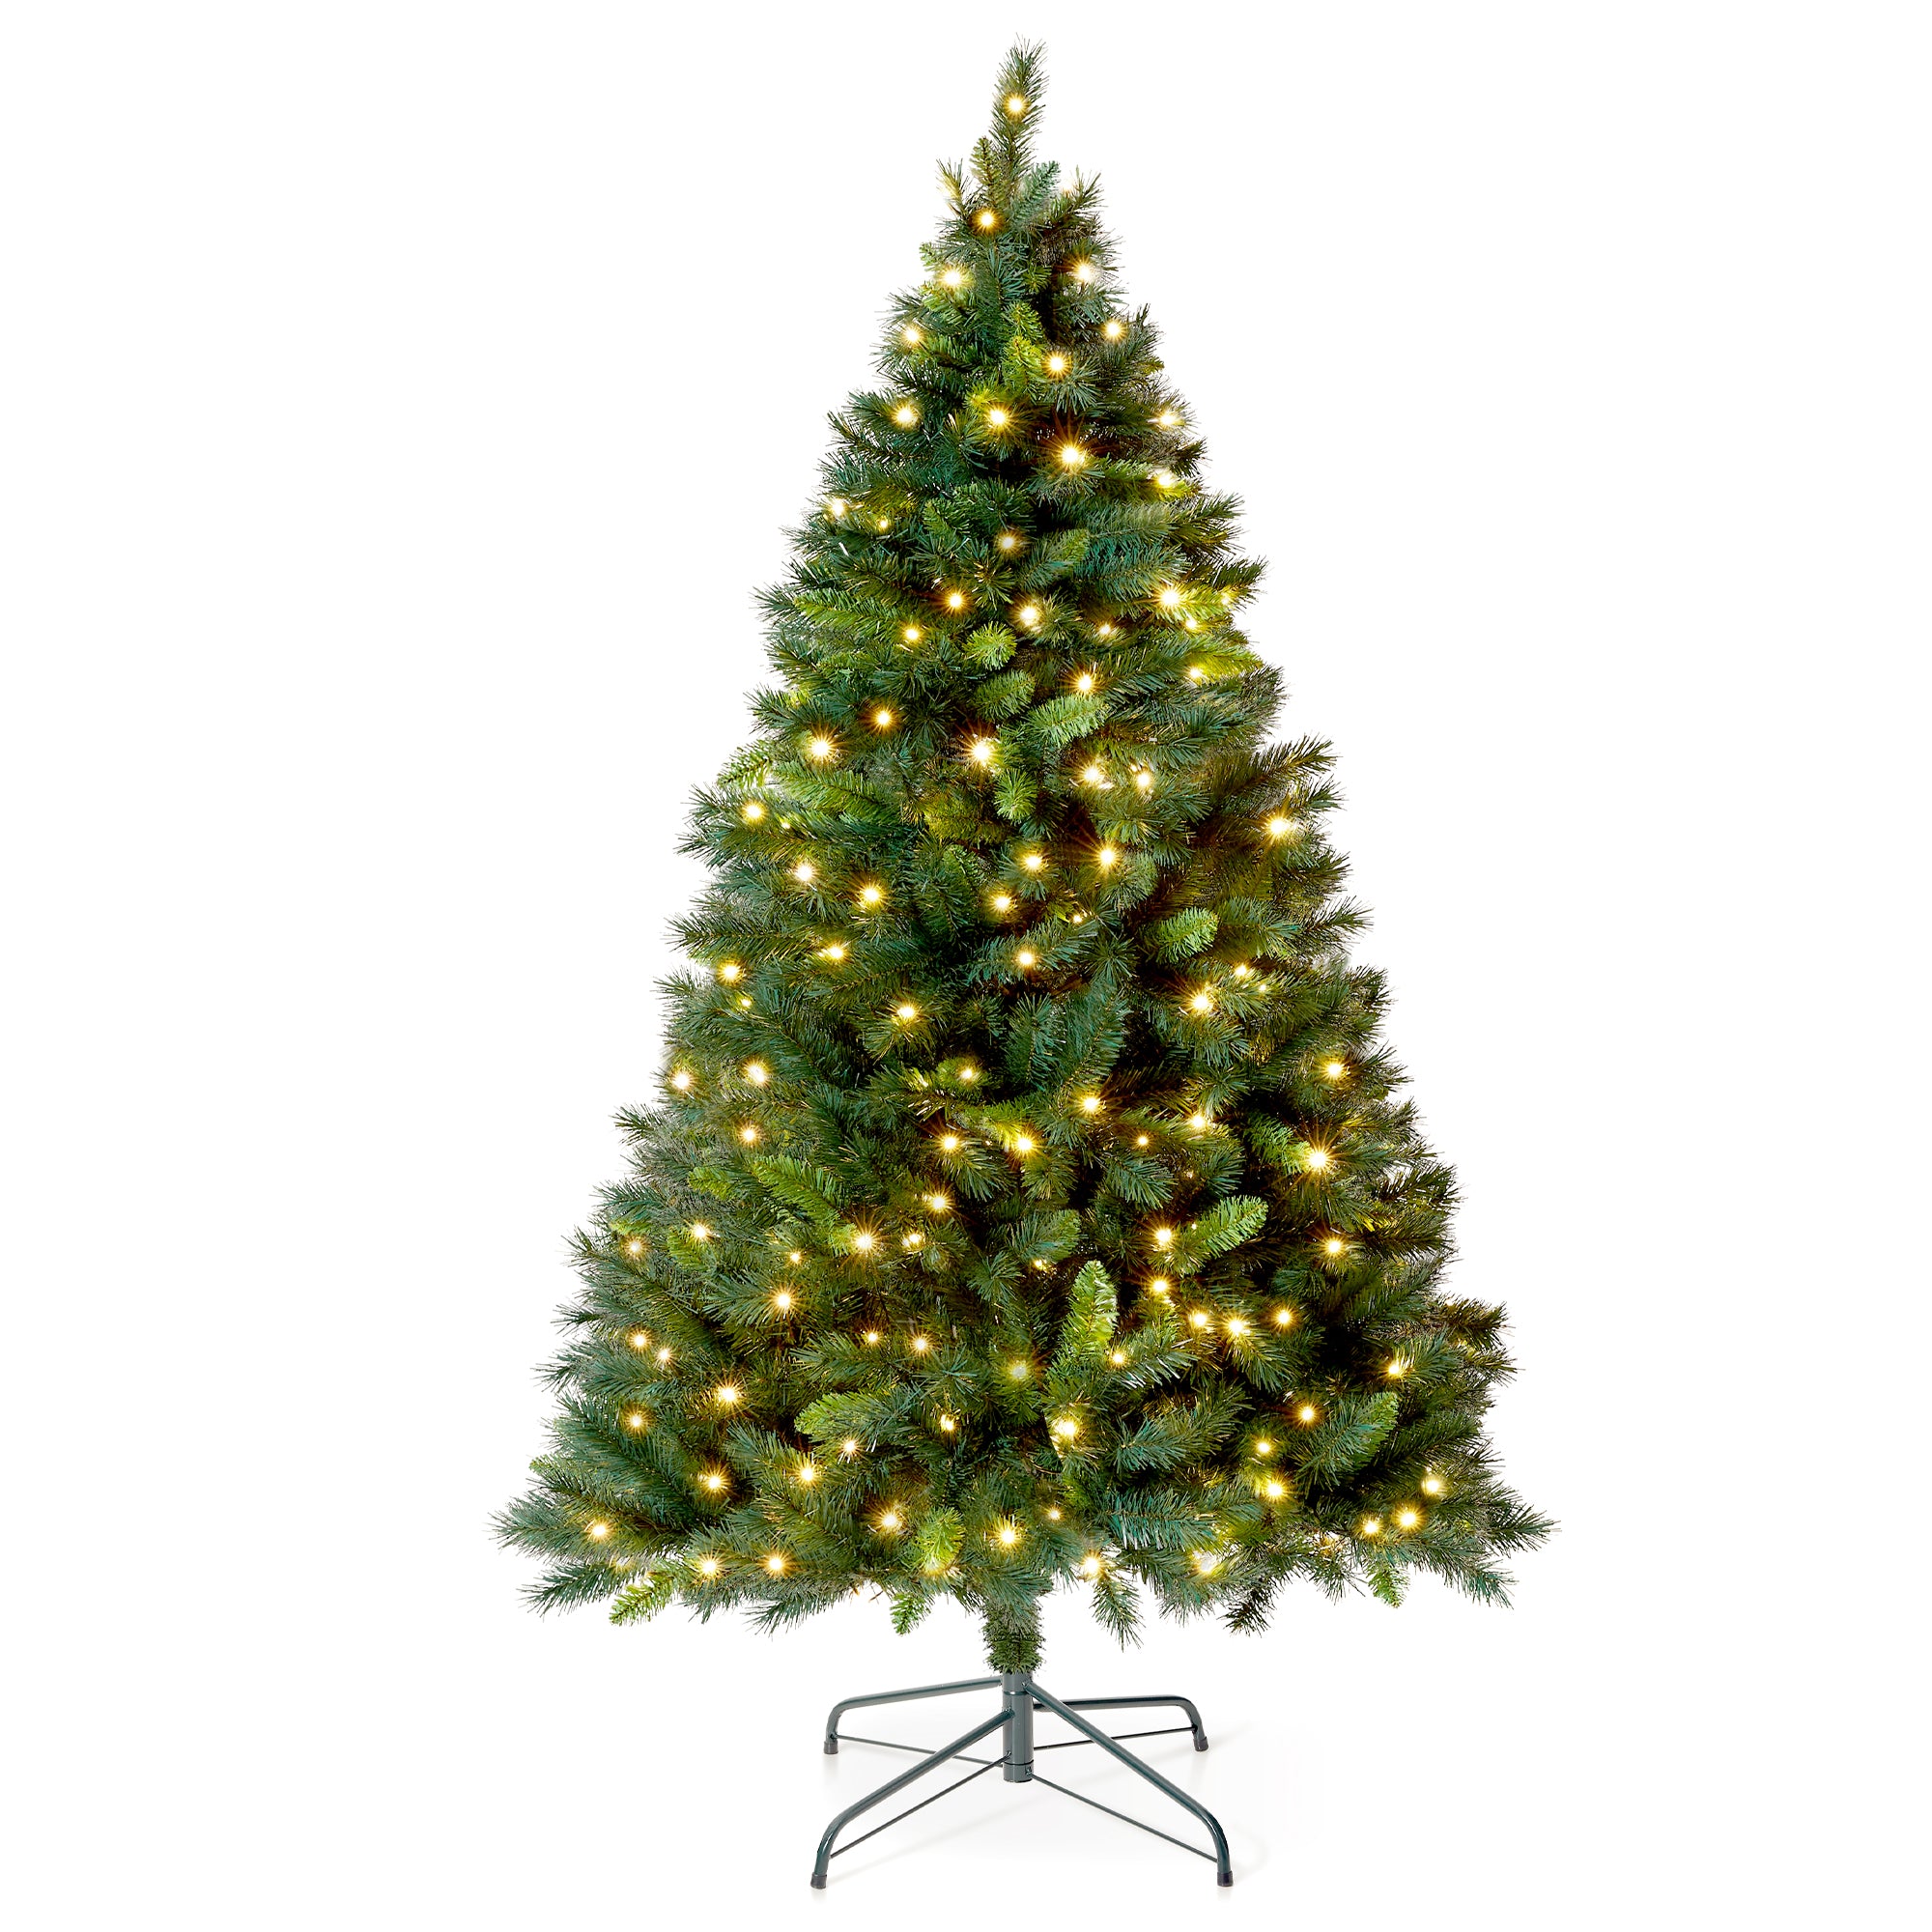 VeryMerry 6FT 'Snowhill' Pre Lit Christmas Tree with 300 Built-In Warm White LED Lights with Auto-Off Timer, 8 Lighting Modes and Foldable Metal Stand